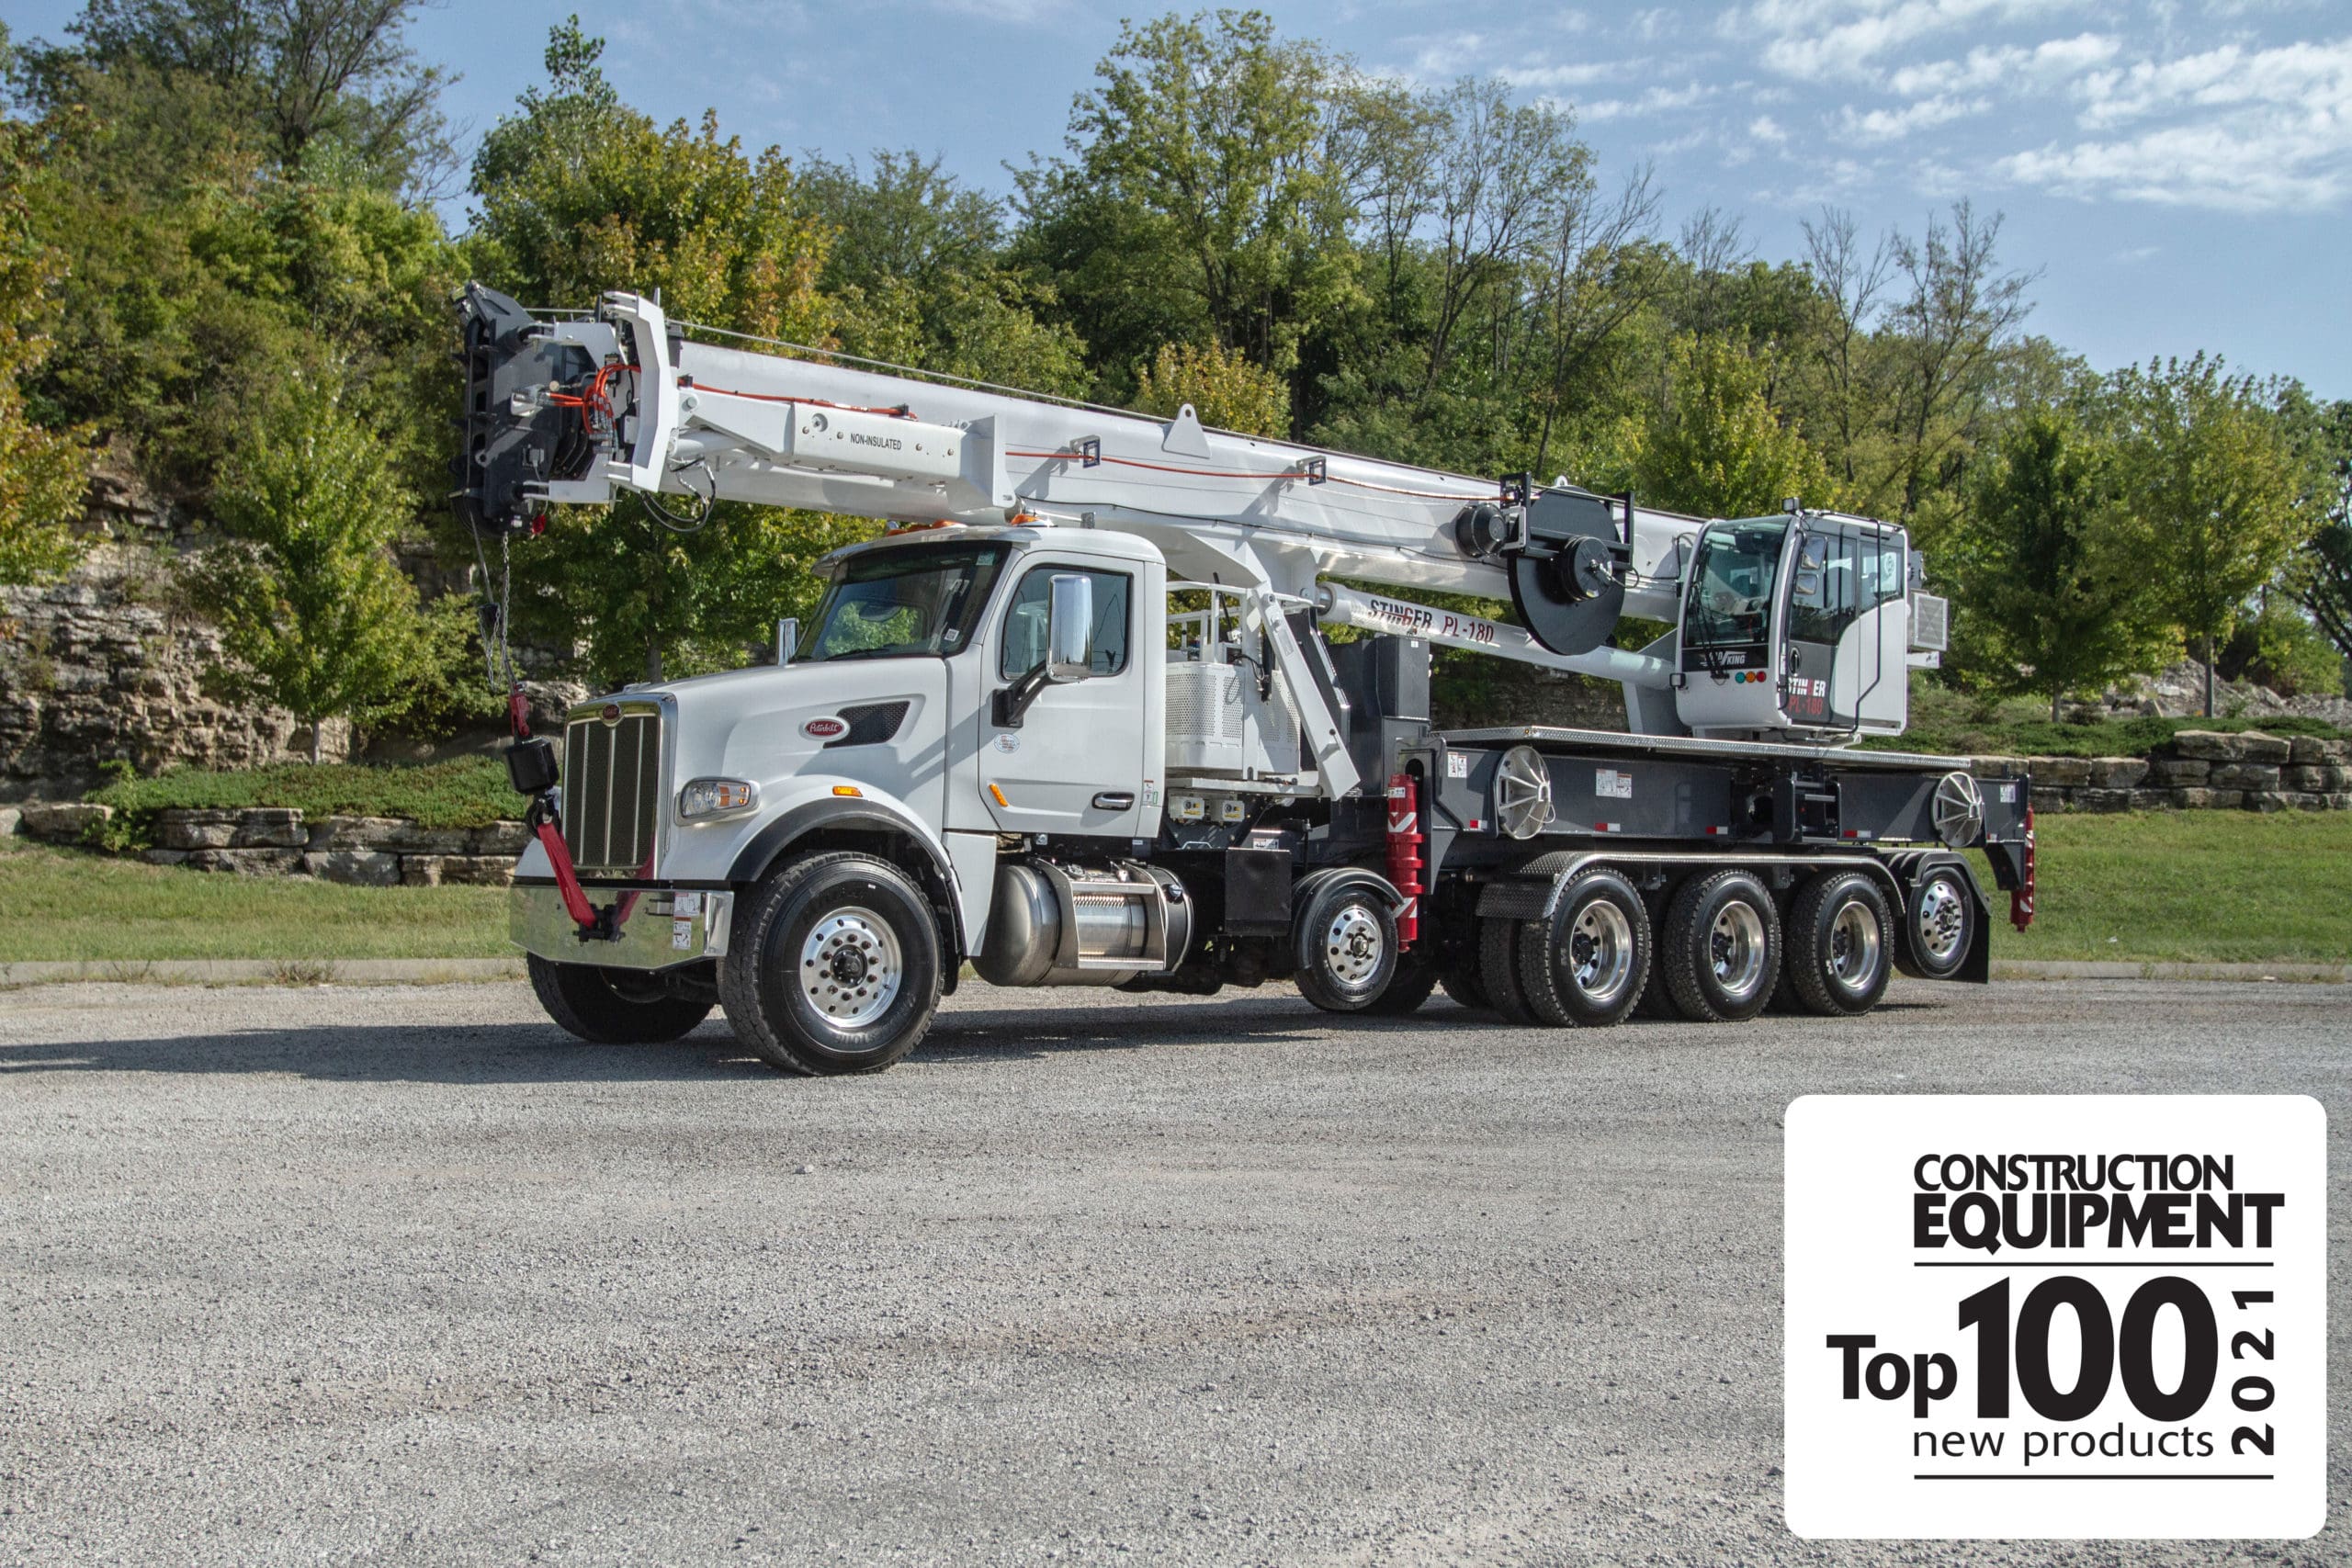 Load King PL180 Receives 2021 Construction Equipment Magazine’s Top 100 New Products Award